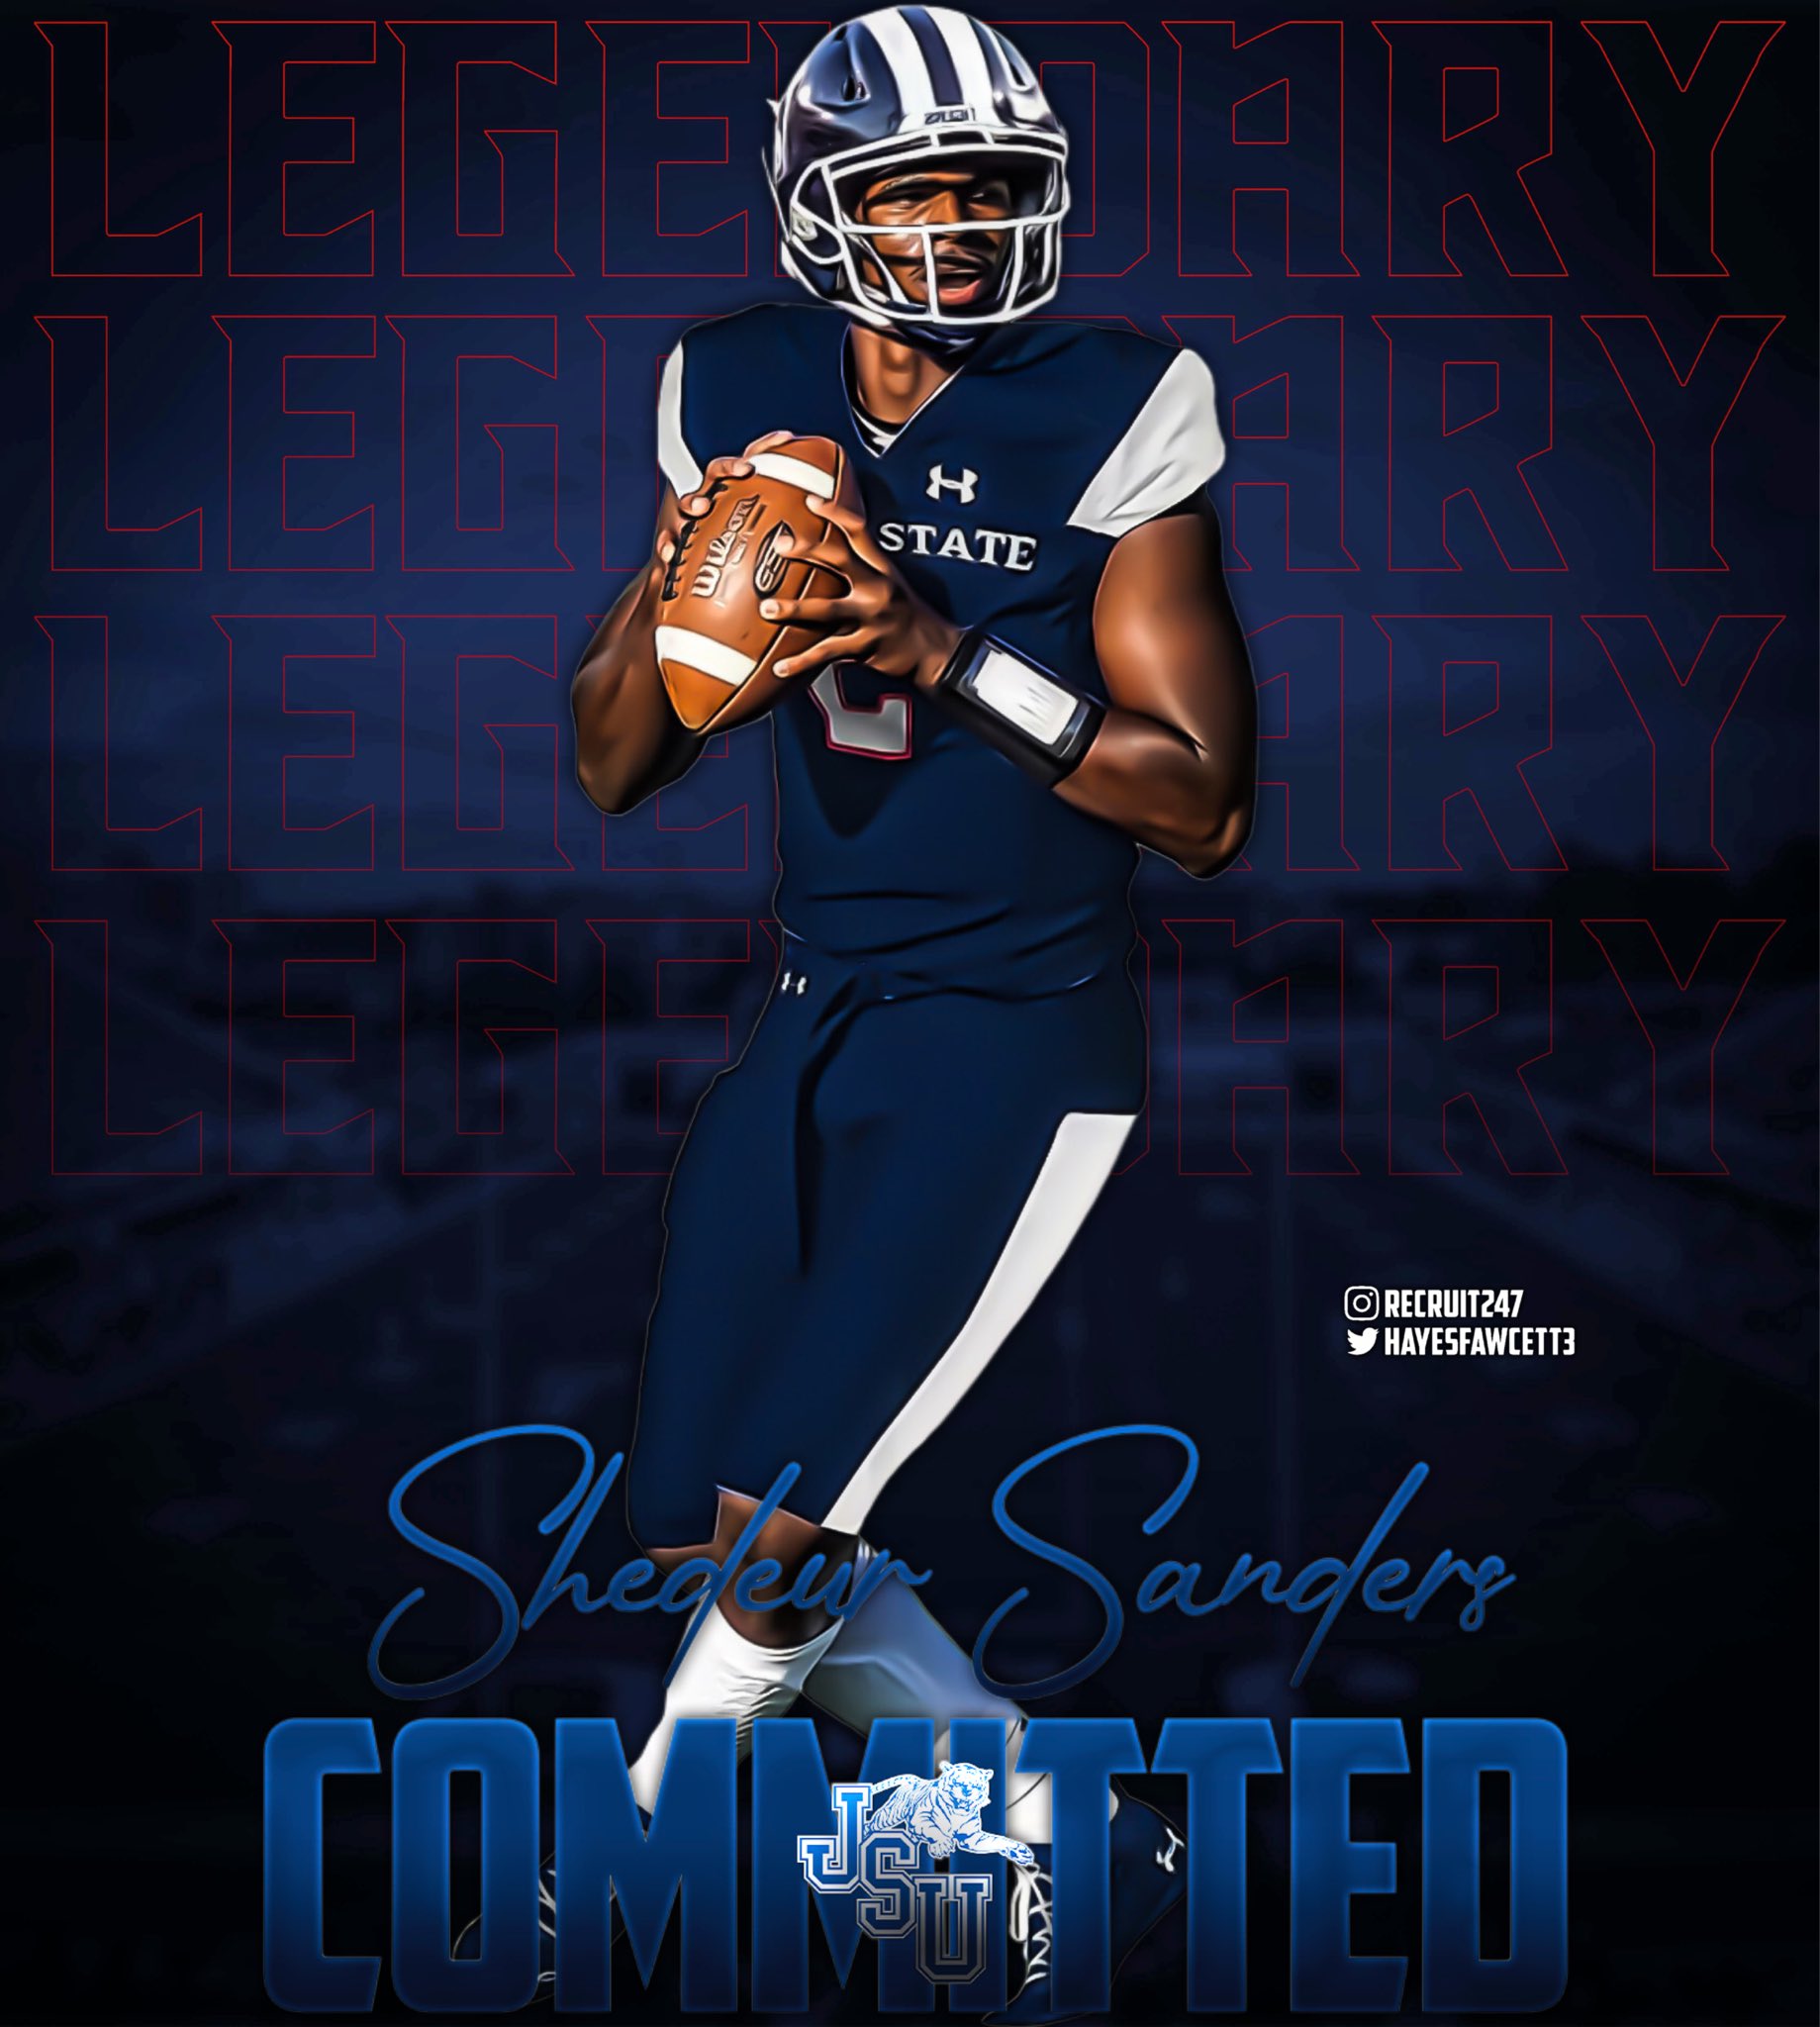 Deion Sanders' son commits to play for Jackson State University